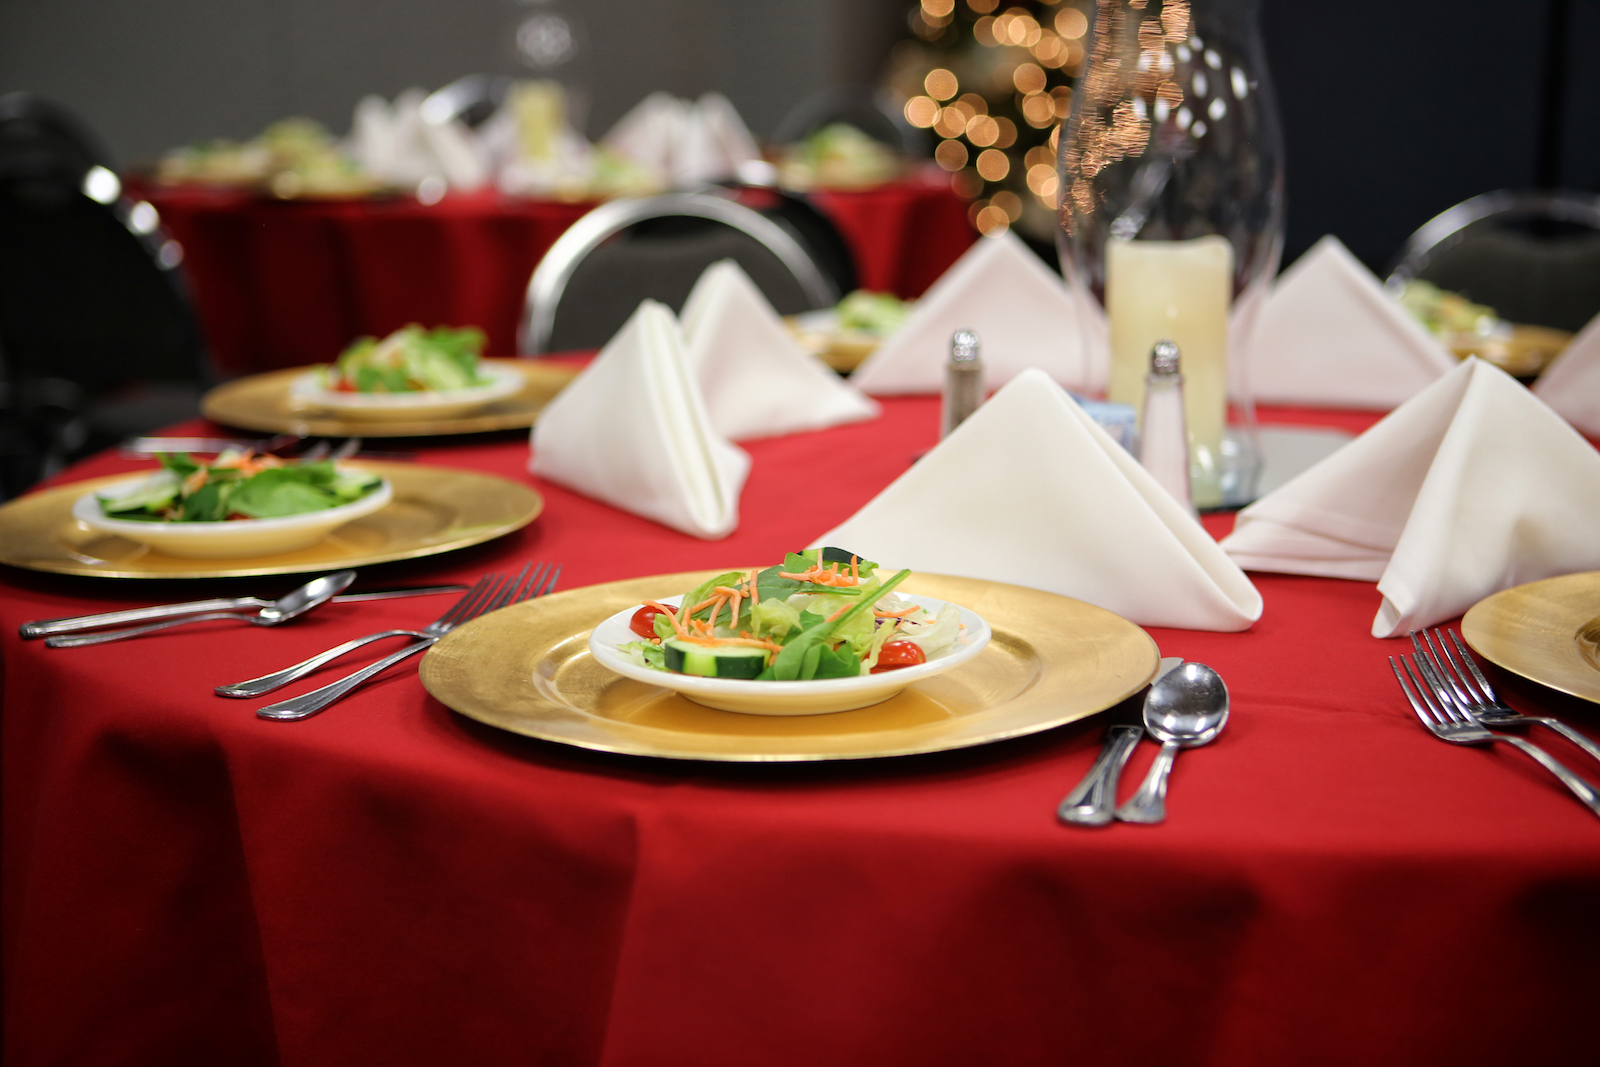 Enjoy the Holidays at the Red Oak Ballroom San Antonio, Preset Salads make Dinner Service faster and Guests feel more welcome